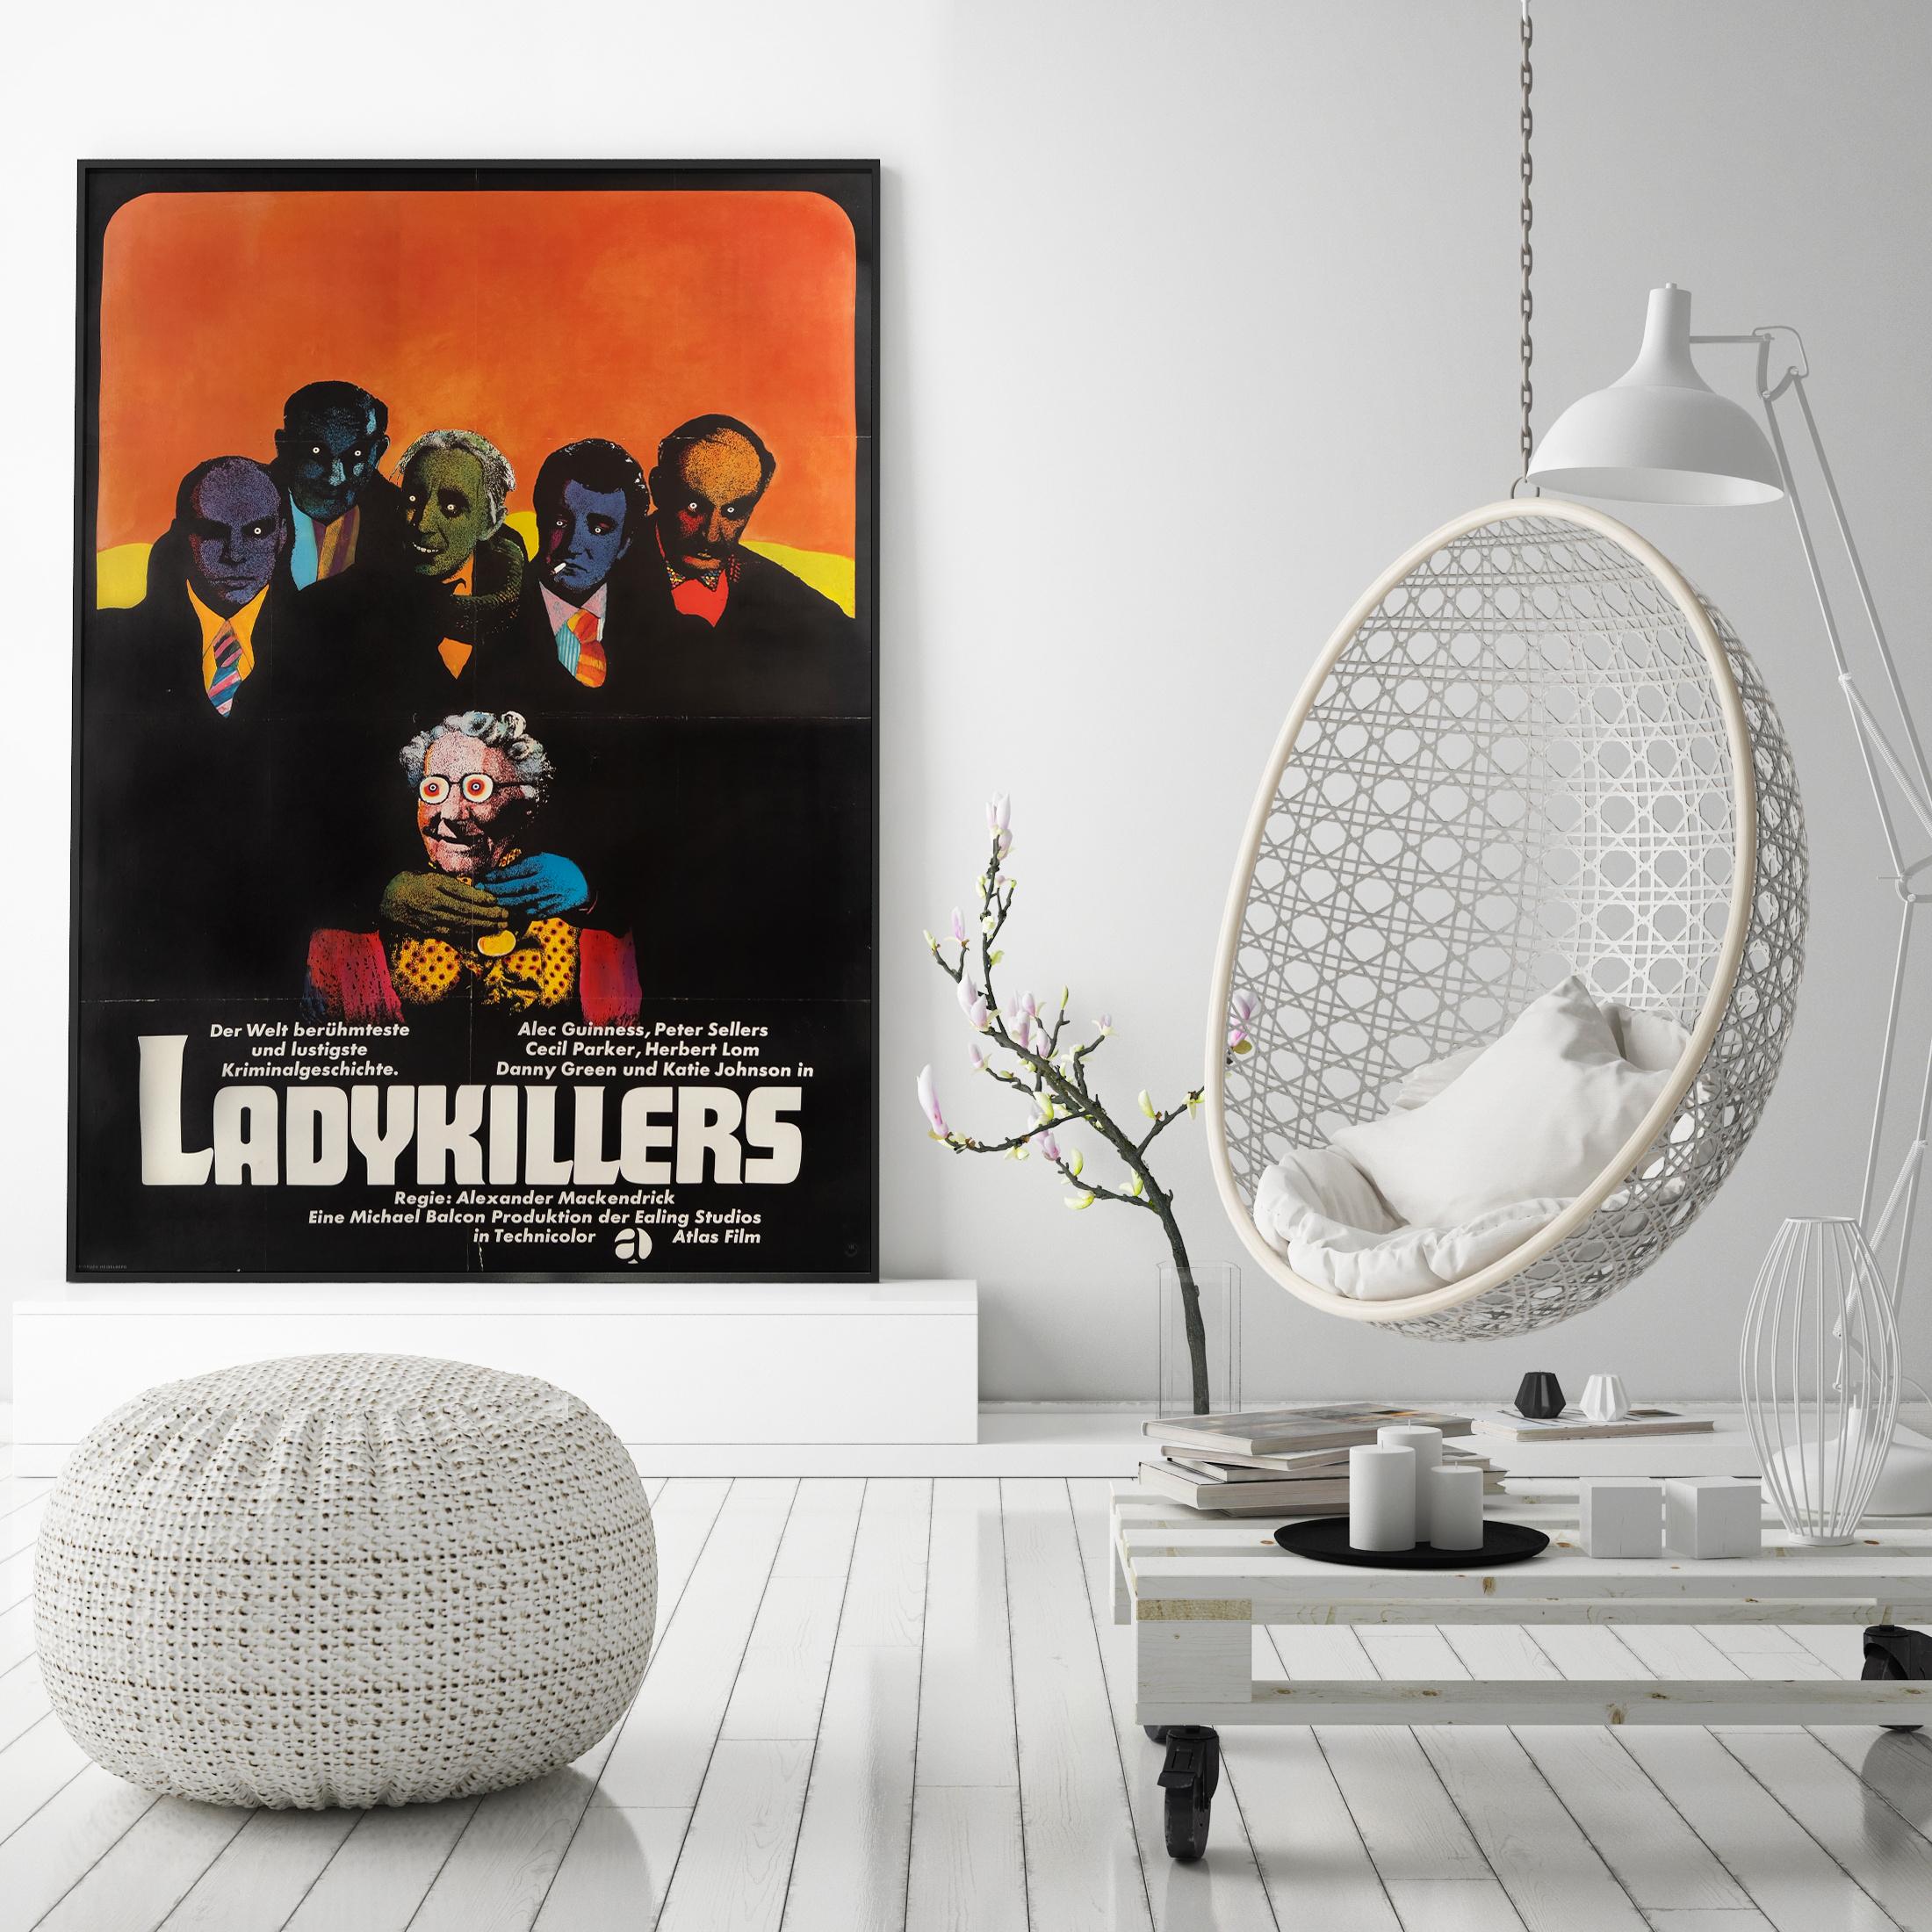 We love Heinz Edelmann's darkly humorous and wonderfully psychedelic design that features on the 60s re-release for Ealing classic The Ladykillers. Edelmann's unmistakable style works perfectly on this design. 

Heinz Edelmann (20 June 1934 – 21